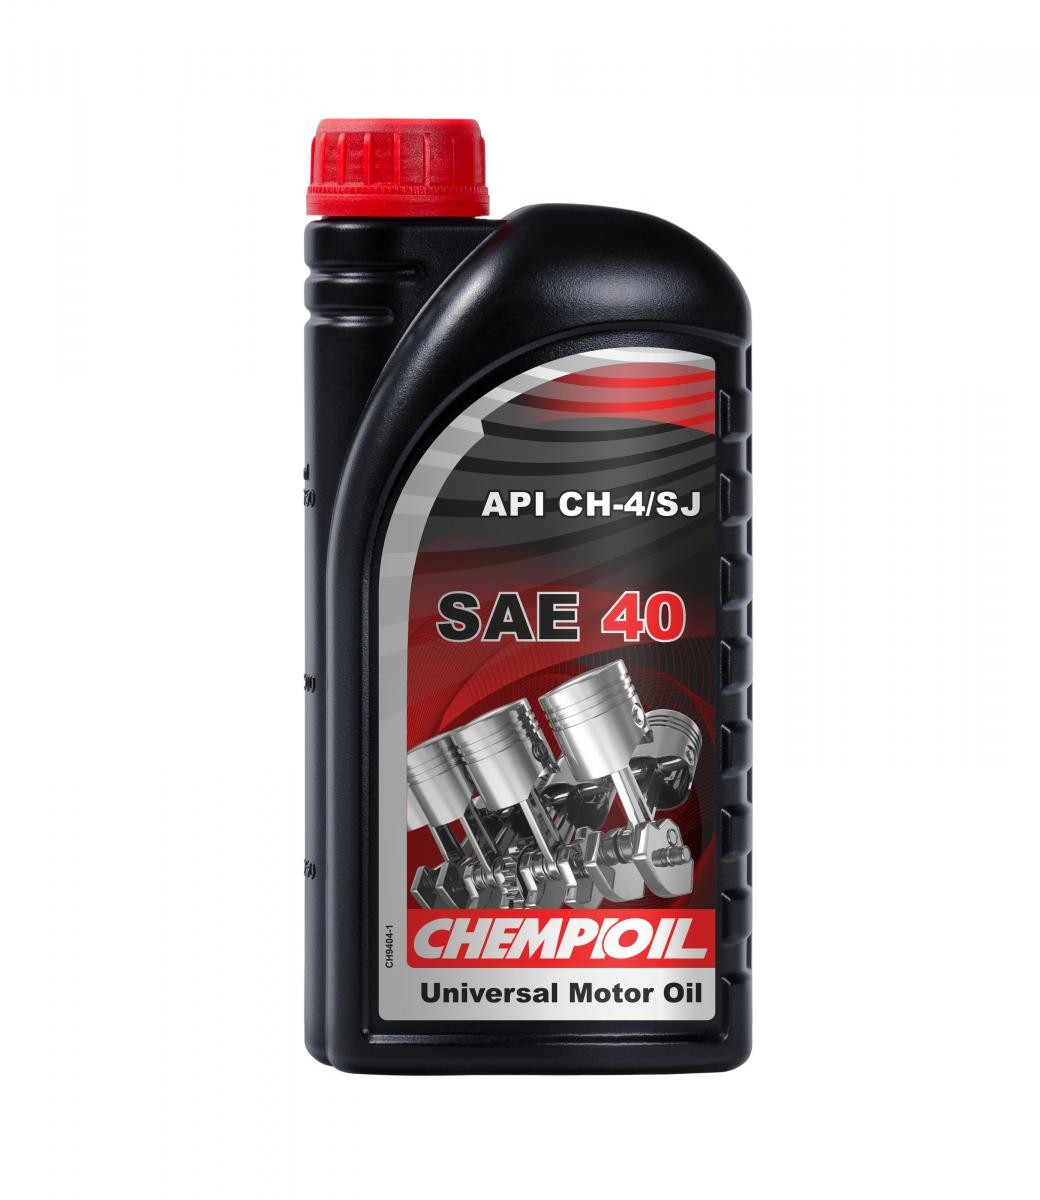 Toyota Engine oil CHEMPIOIL CH9404-1 at a good price